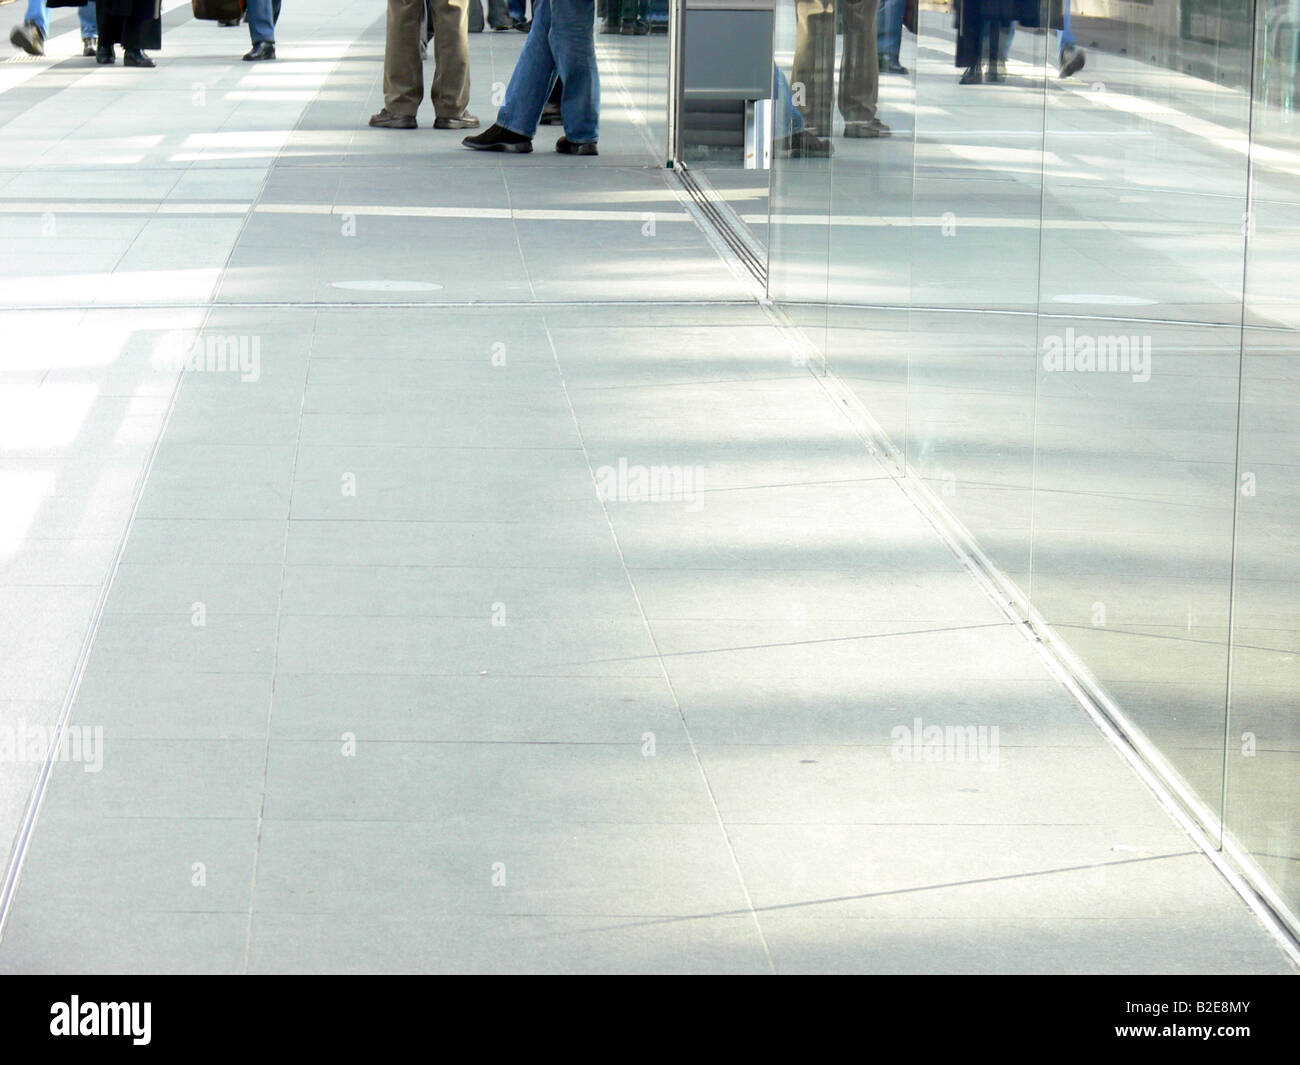 Reflection of glass wall on tiled flooring Stock Photo